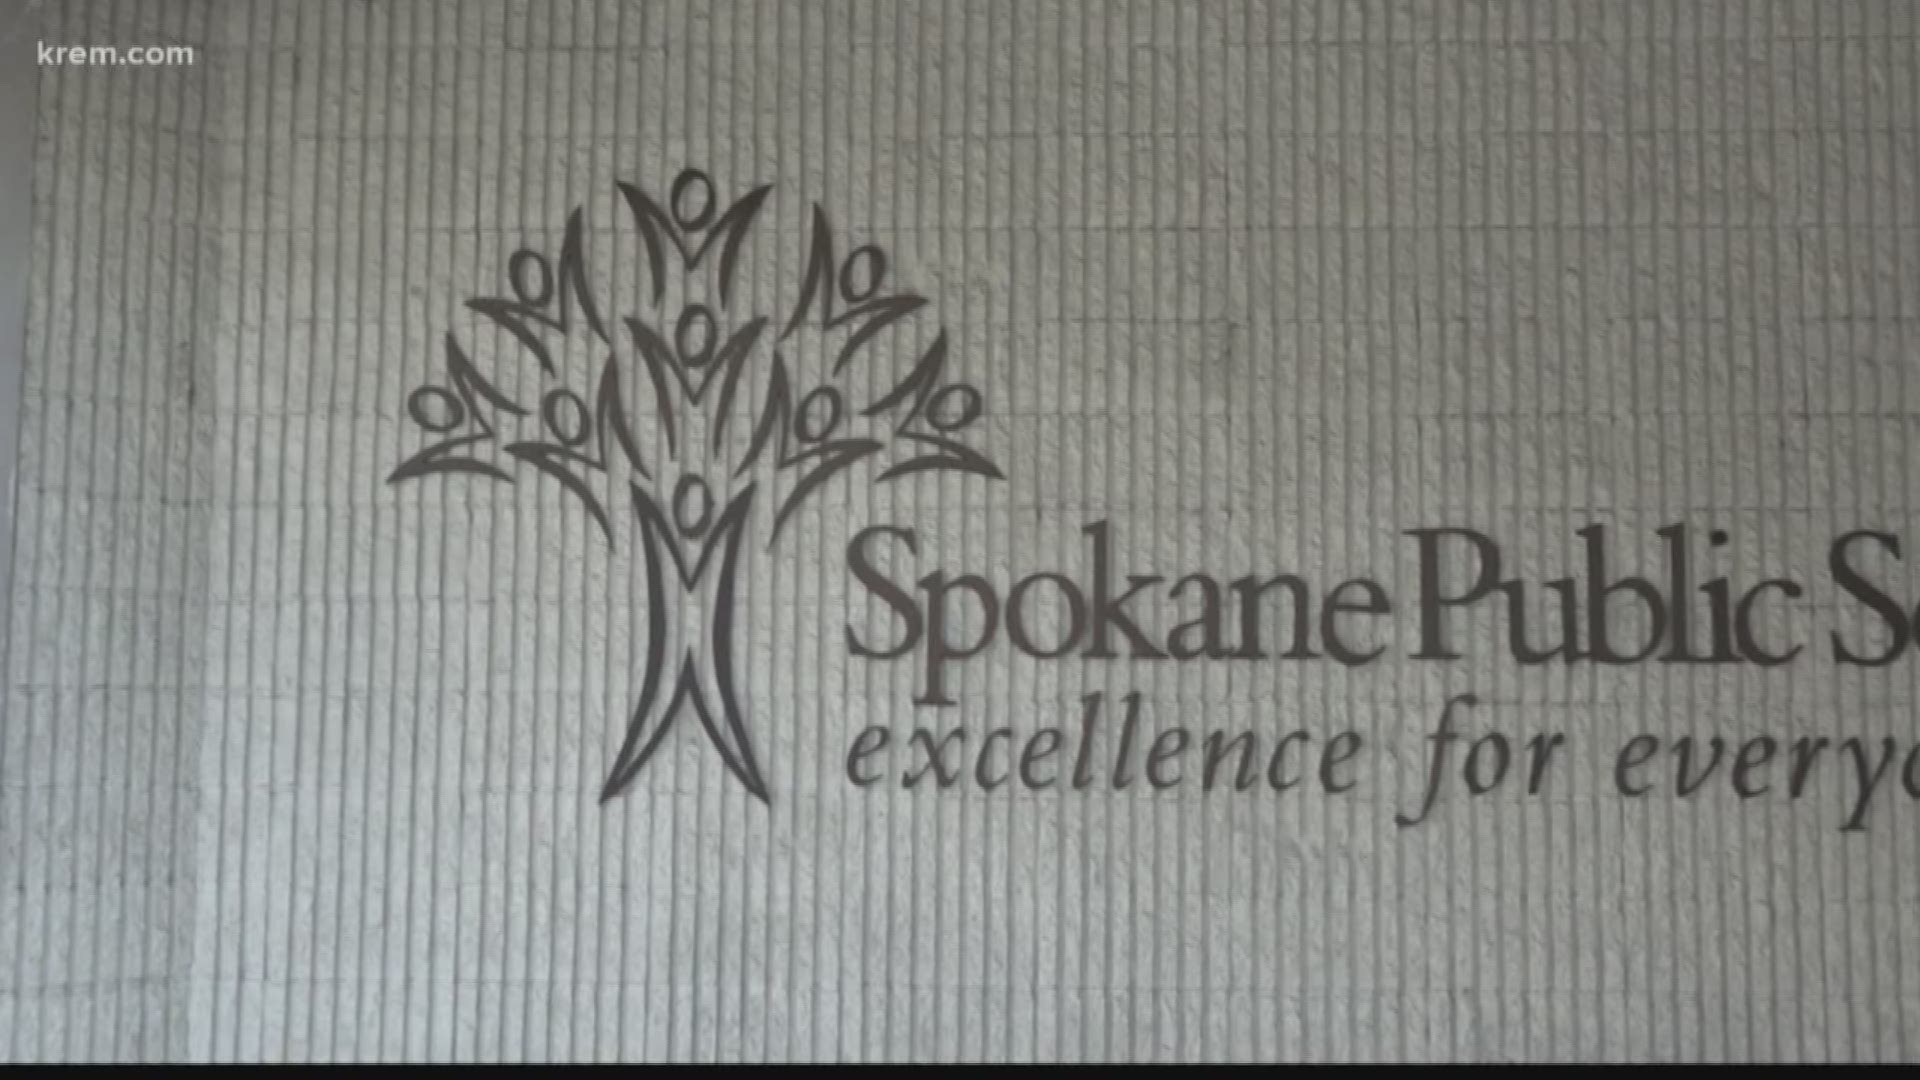 Spokane Public Schools just announced its new after school program to help parents with early release Fridays. The program will give elementary students supervised time to do activities and homework while at school.